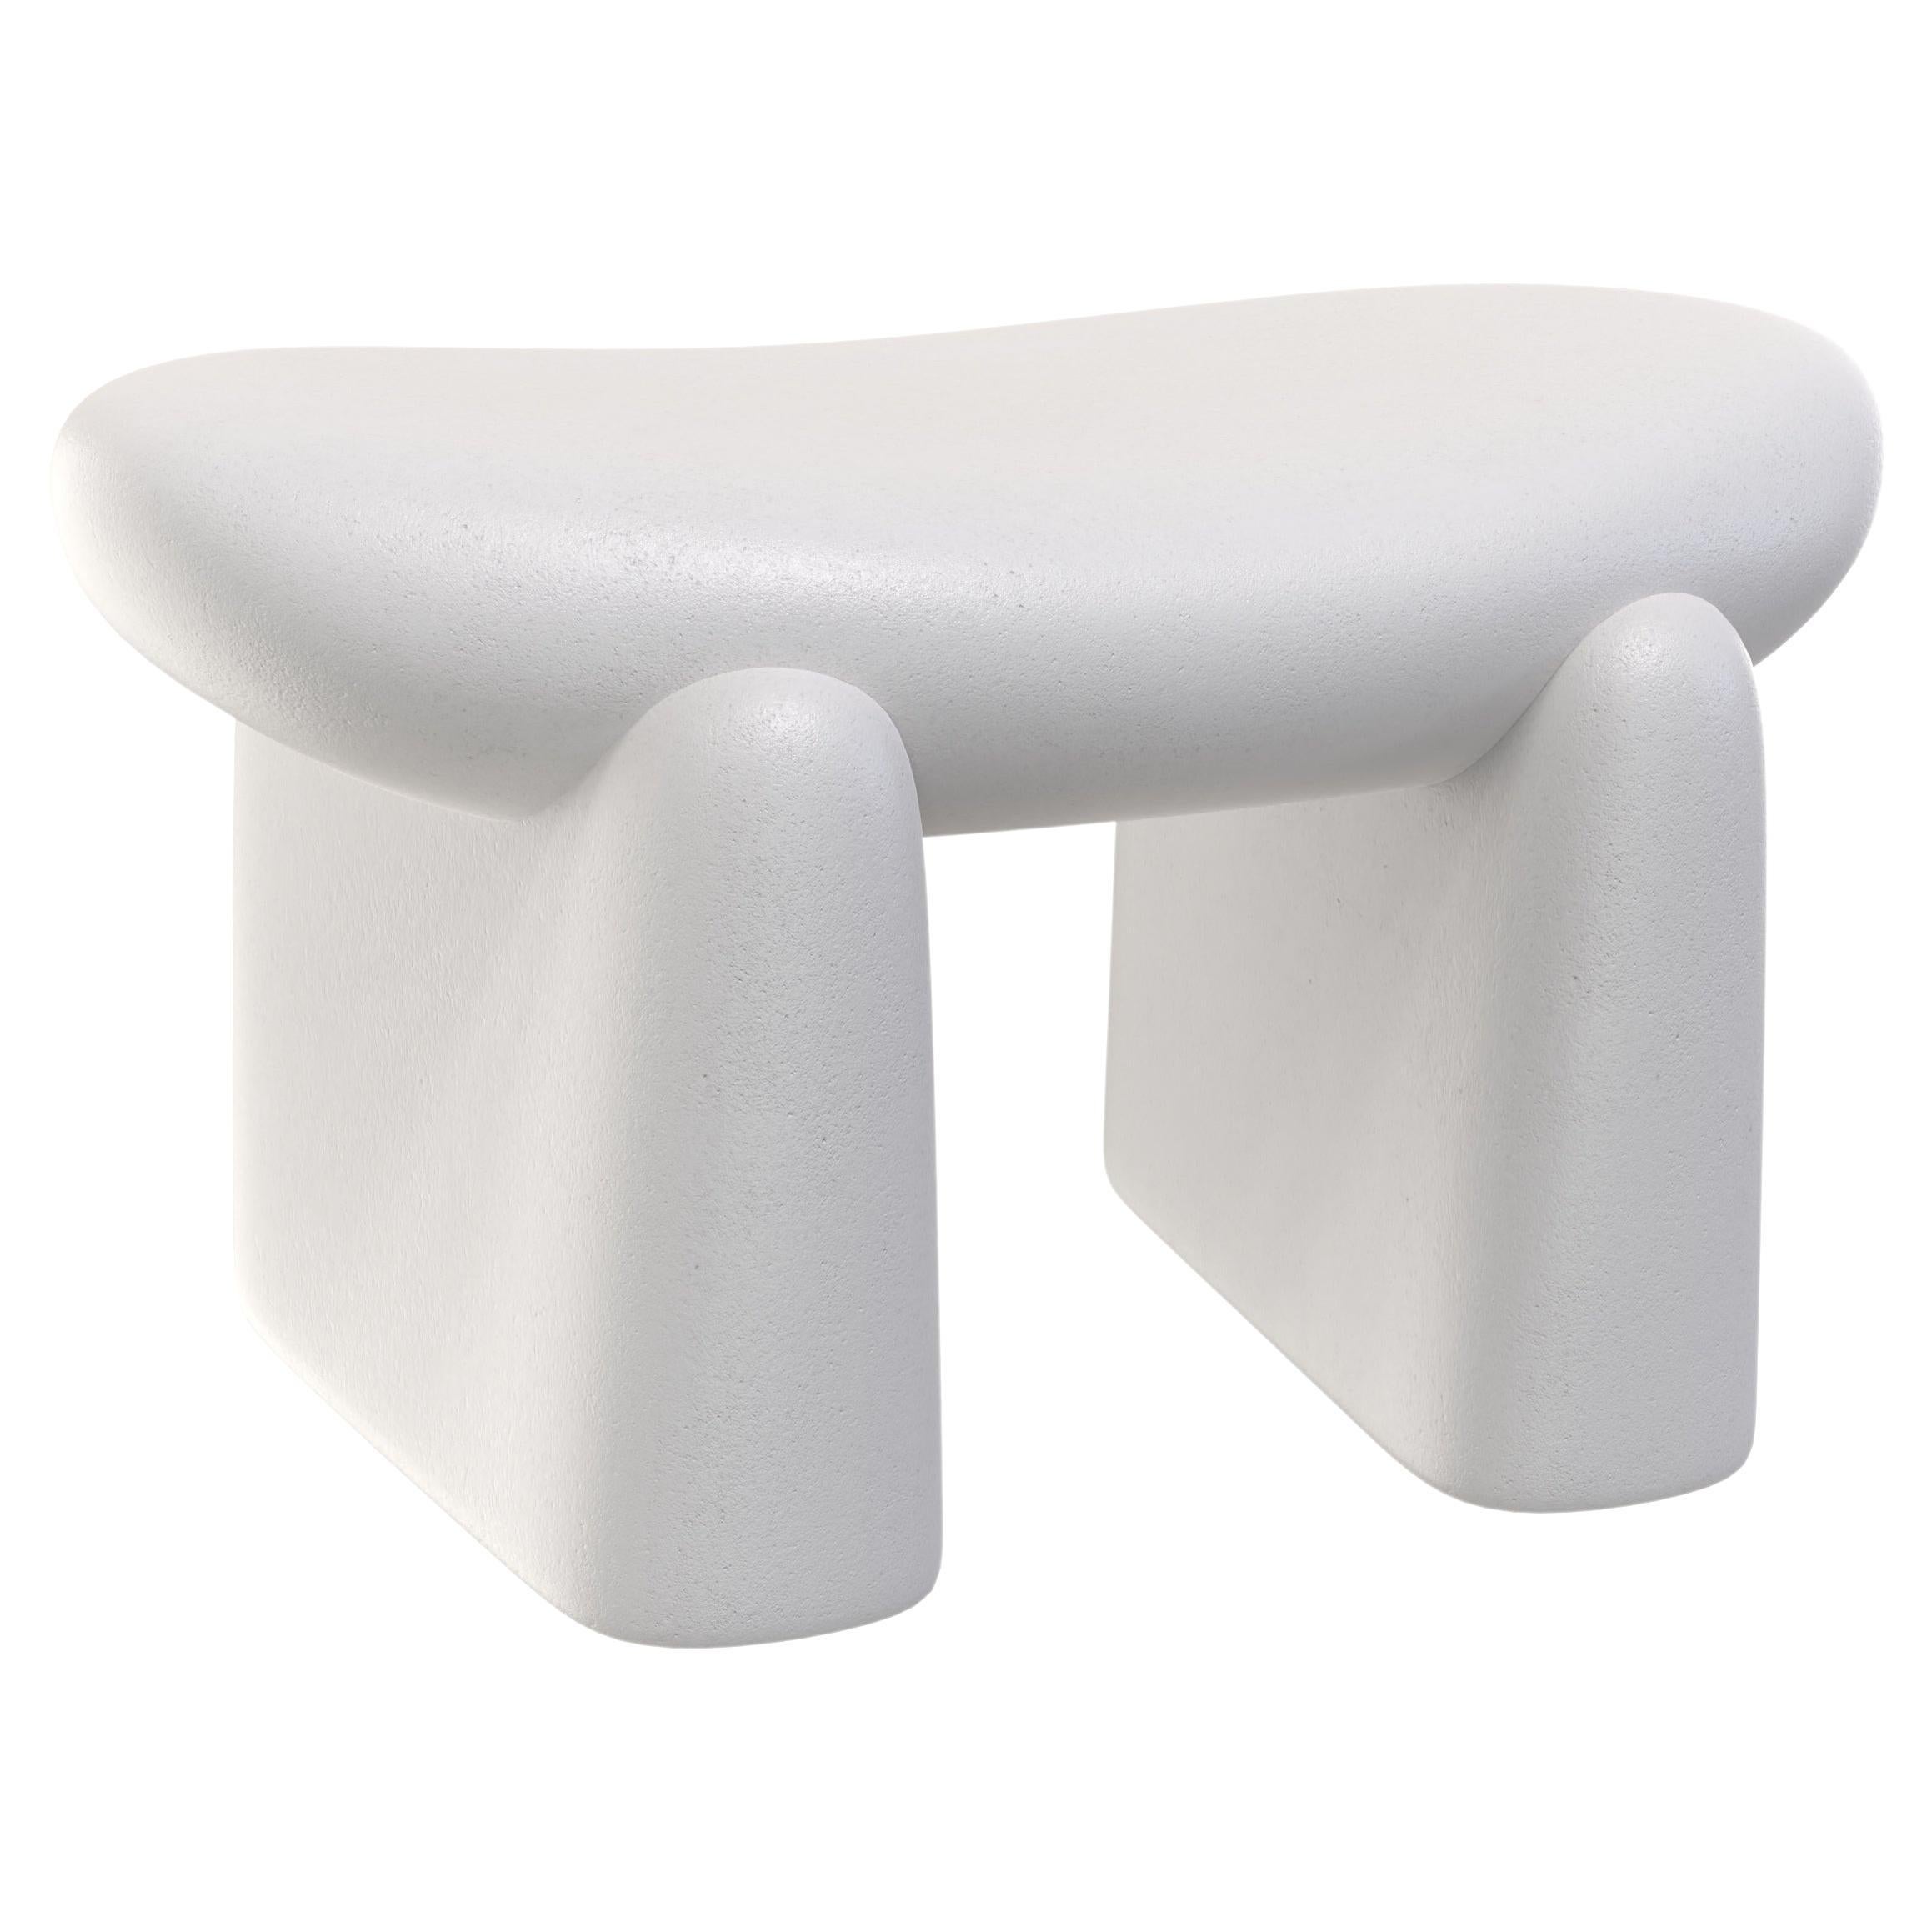 Contemporary Limited Edition Signed Stool, Pau V2 by Edizione Limitata For Sale